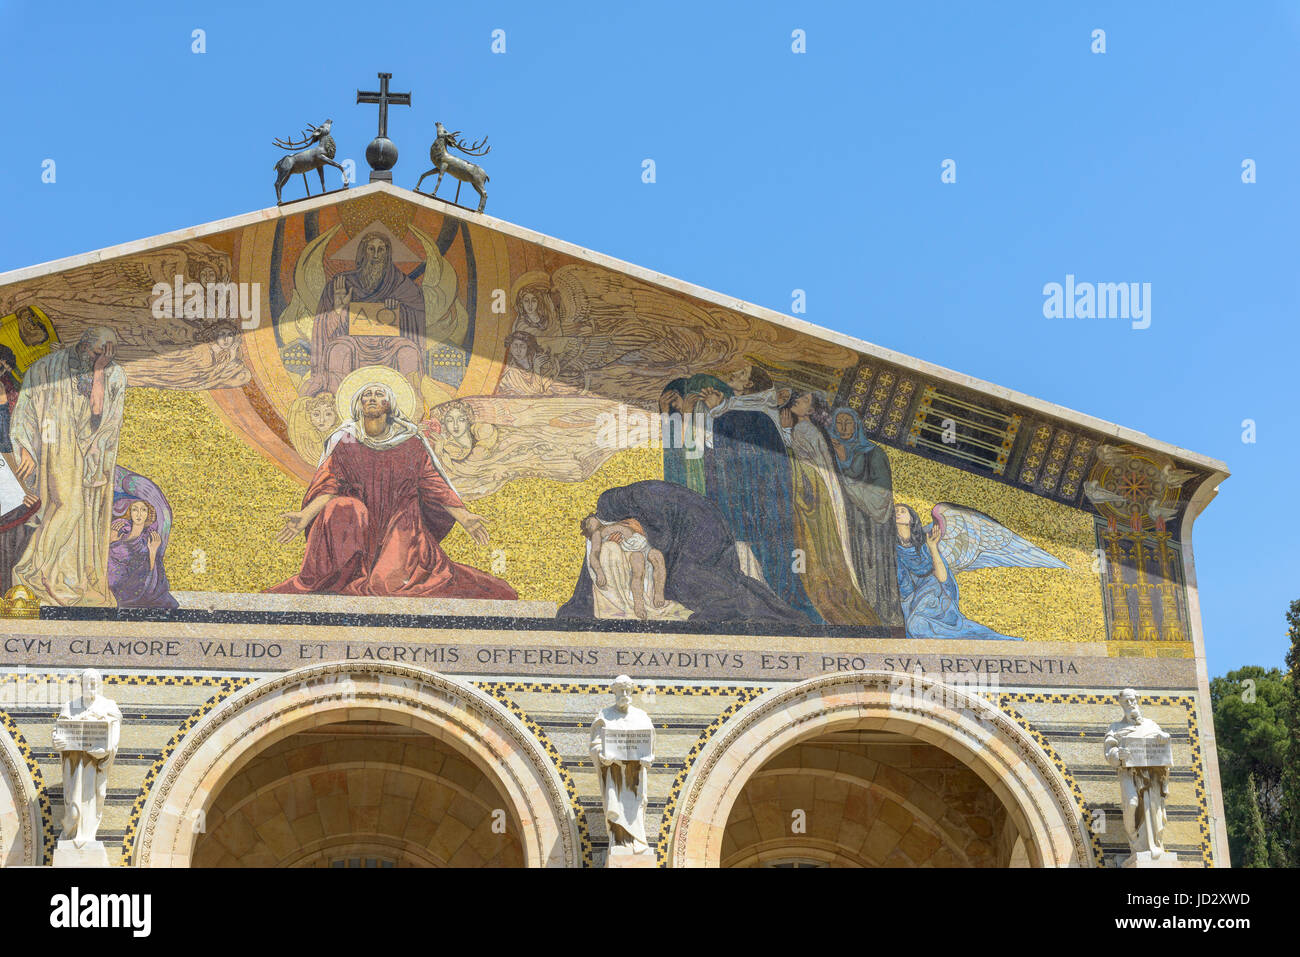 The Church of All Nations or Basilica of the Agony, is a Roman Catholic church near the Garden of Gethsemane at the Mount of Olives in Jerusalem, Isra Stock Photo